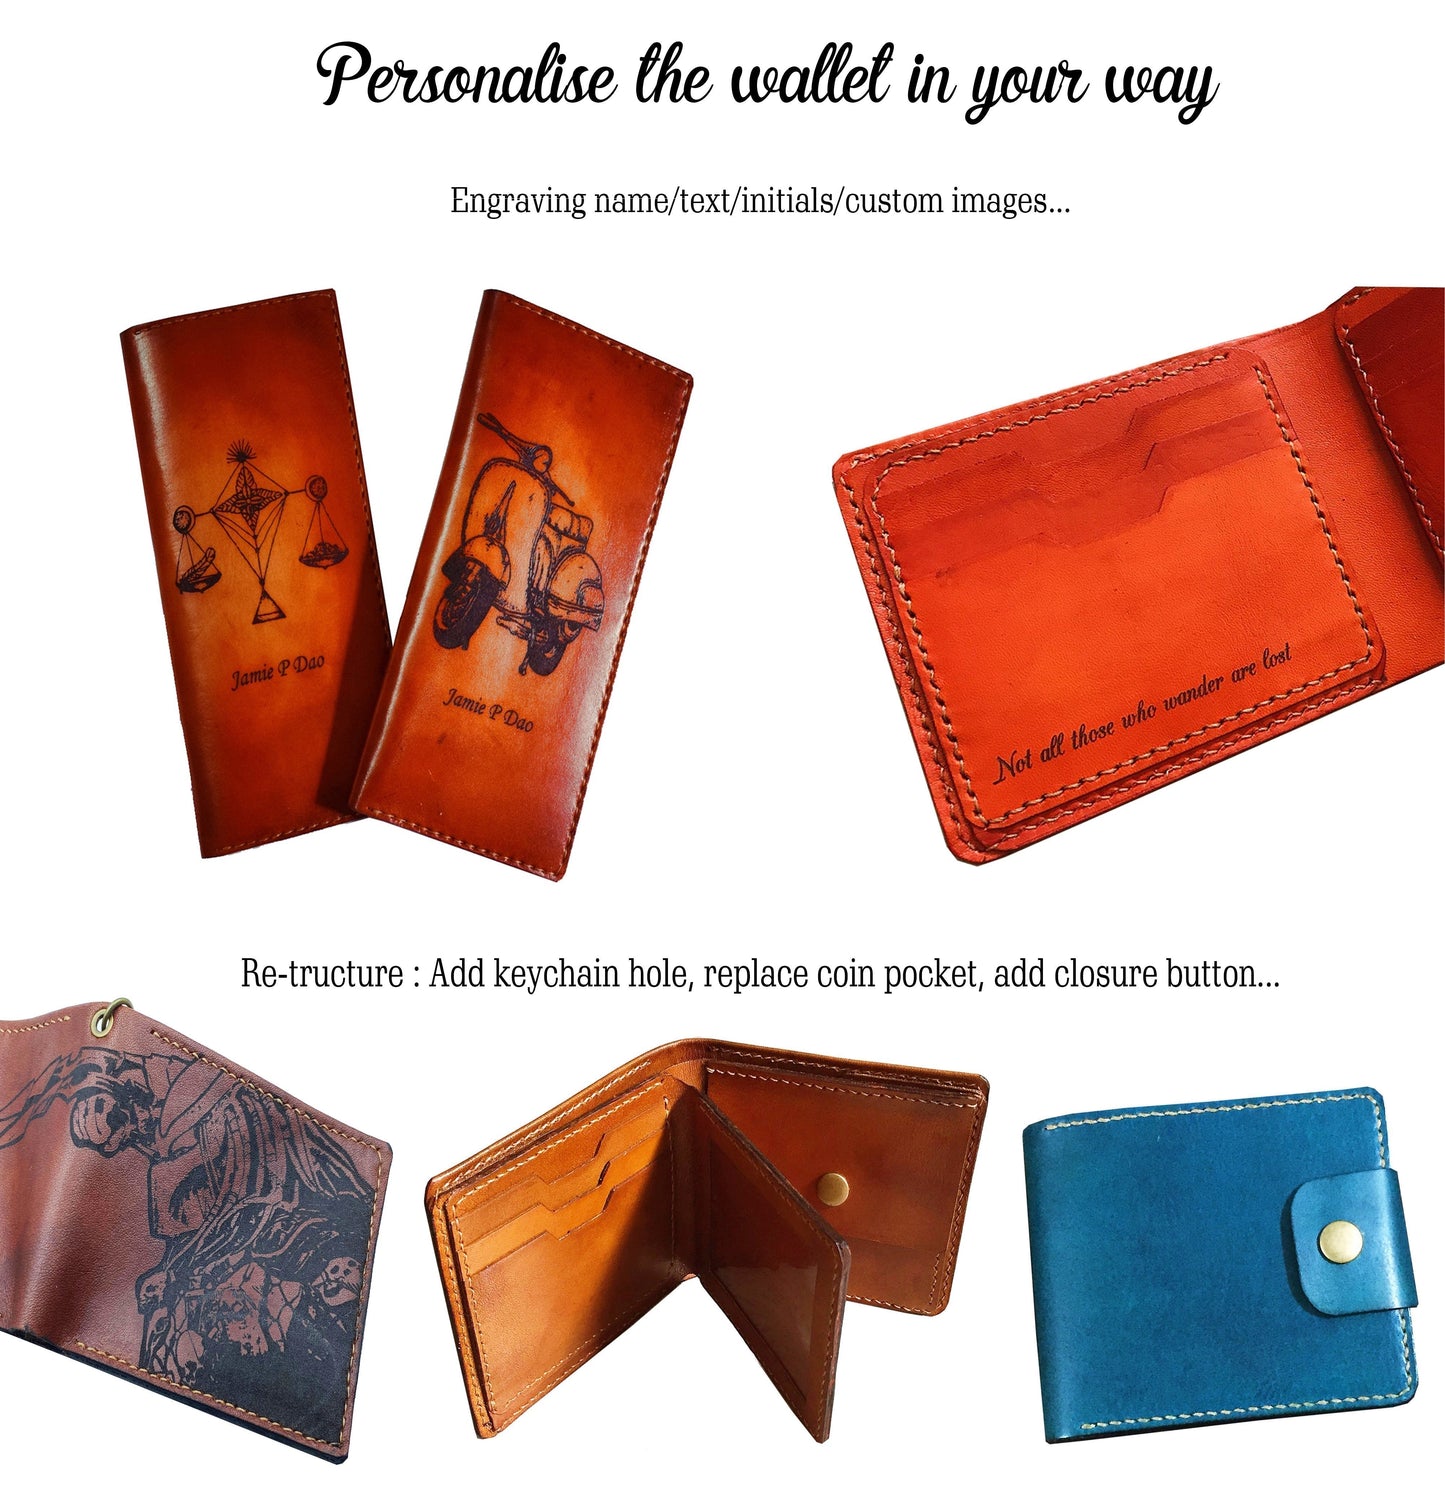 Mayan Corner - Personalized genuine leather handmade wallet, leather gift ideas for him, ninja turtle leather art wallet - 01112210